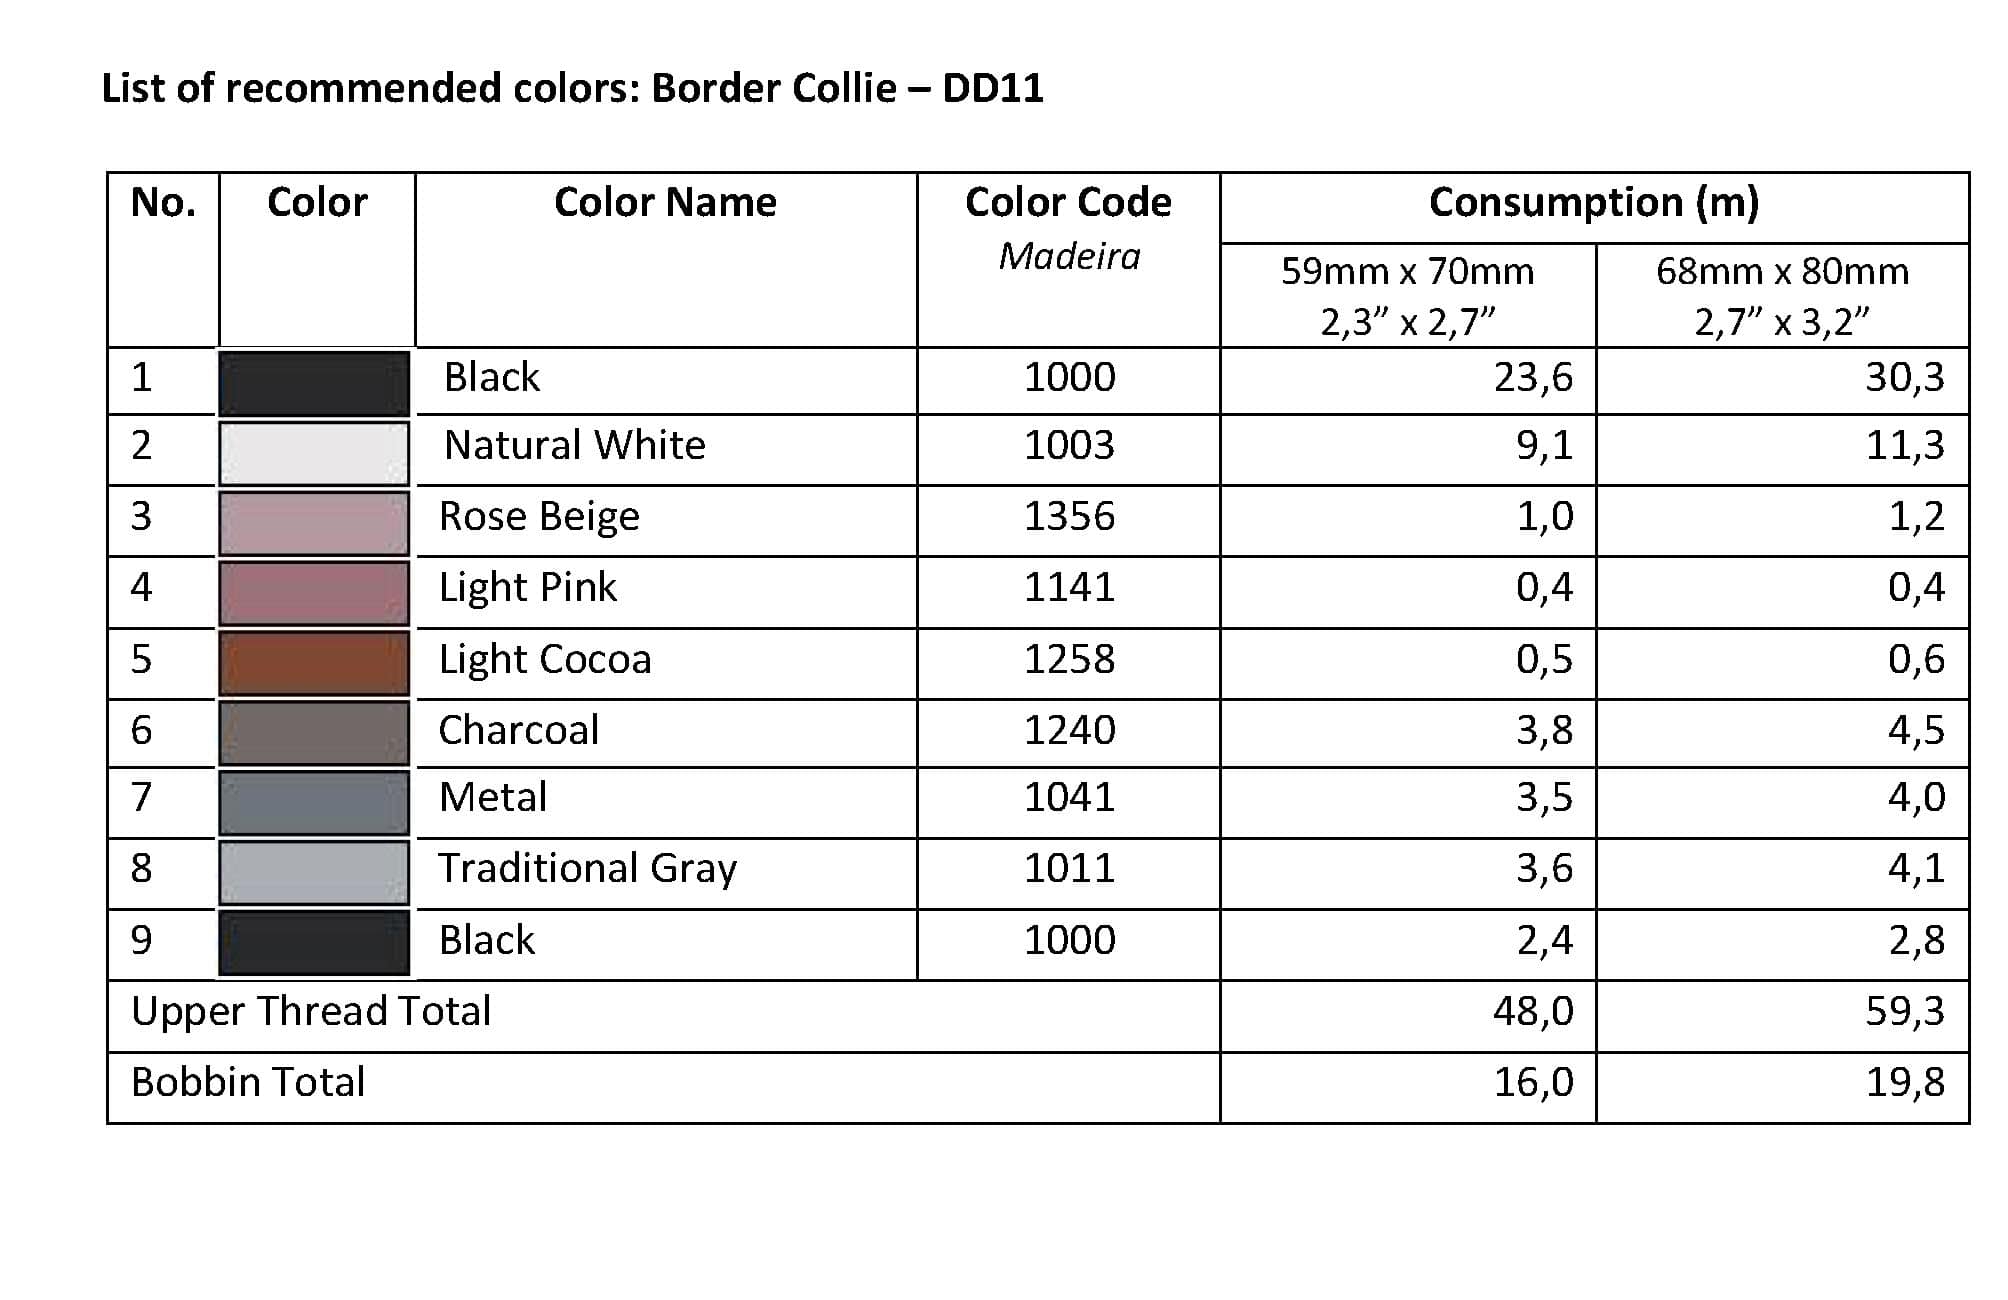 List of Recommended Colors - Border Collie DD11